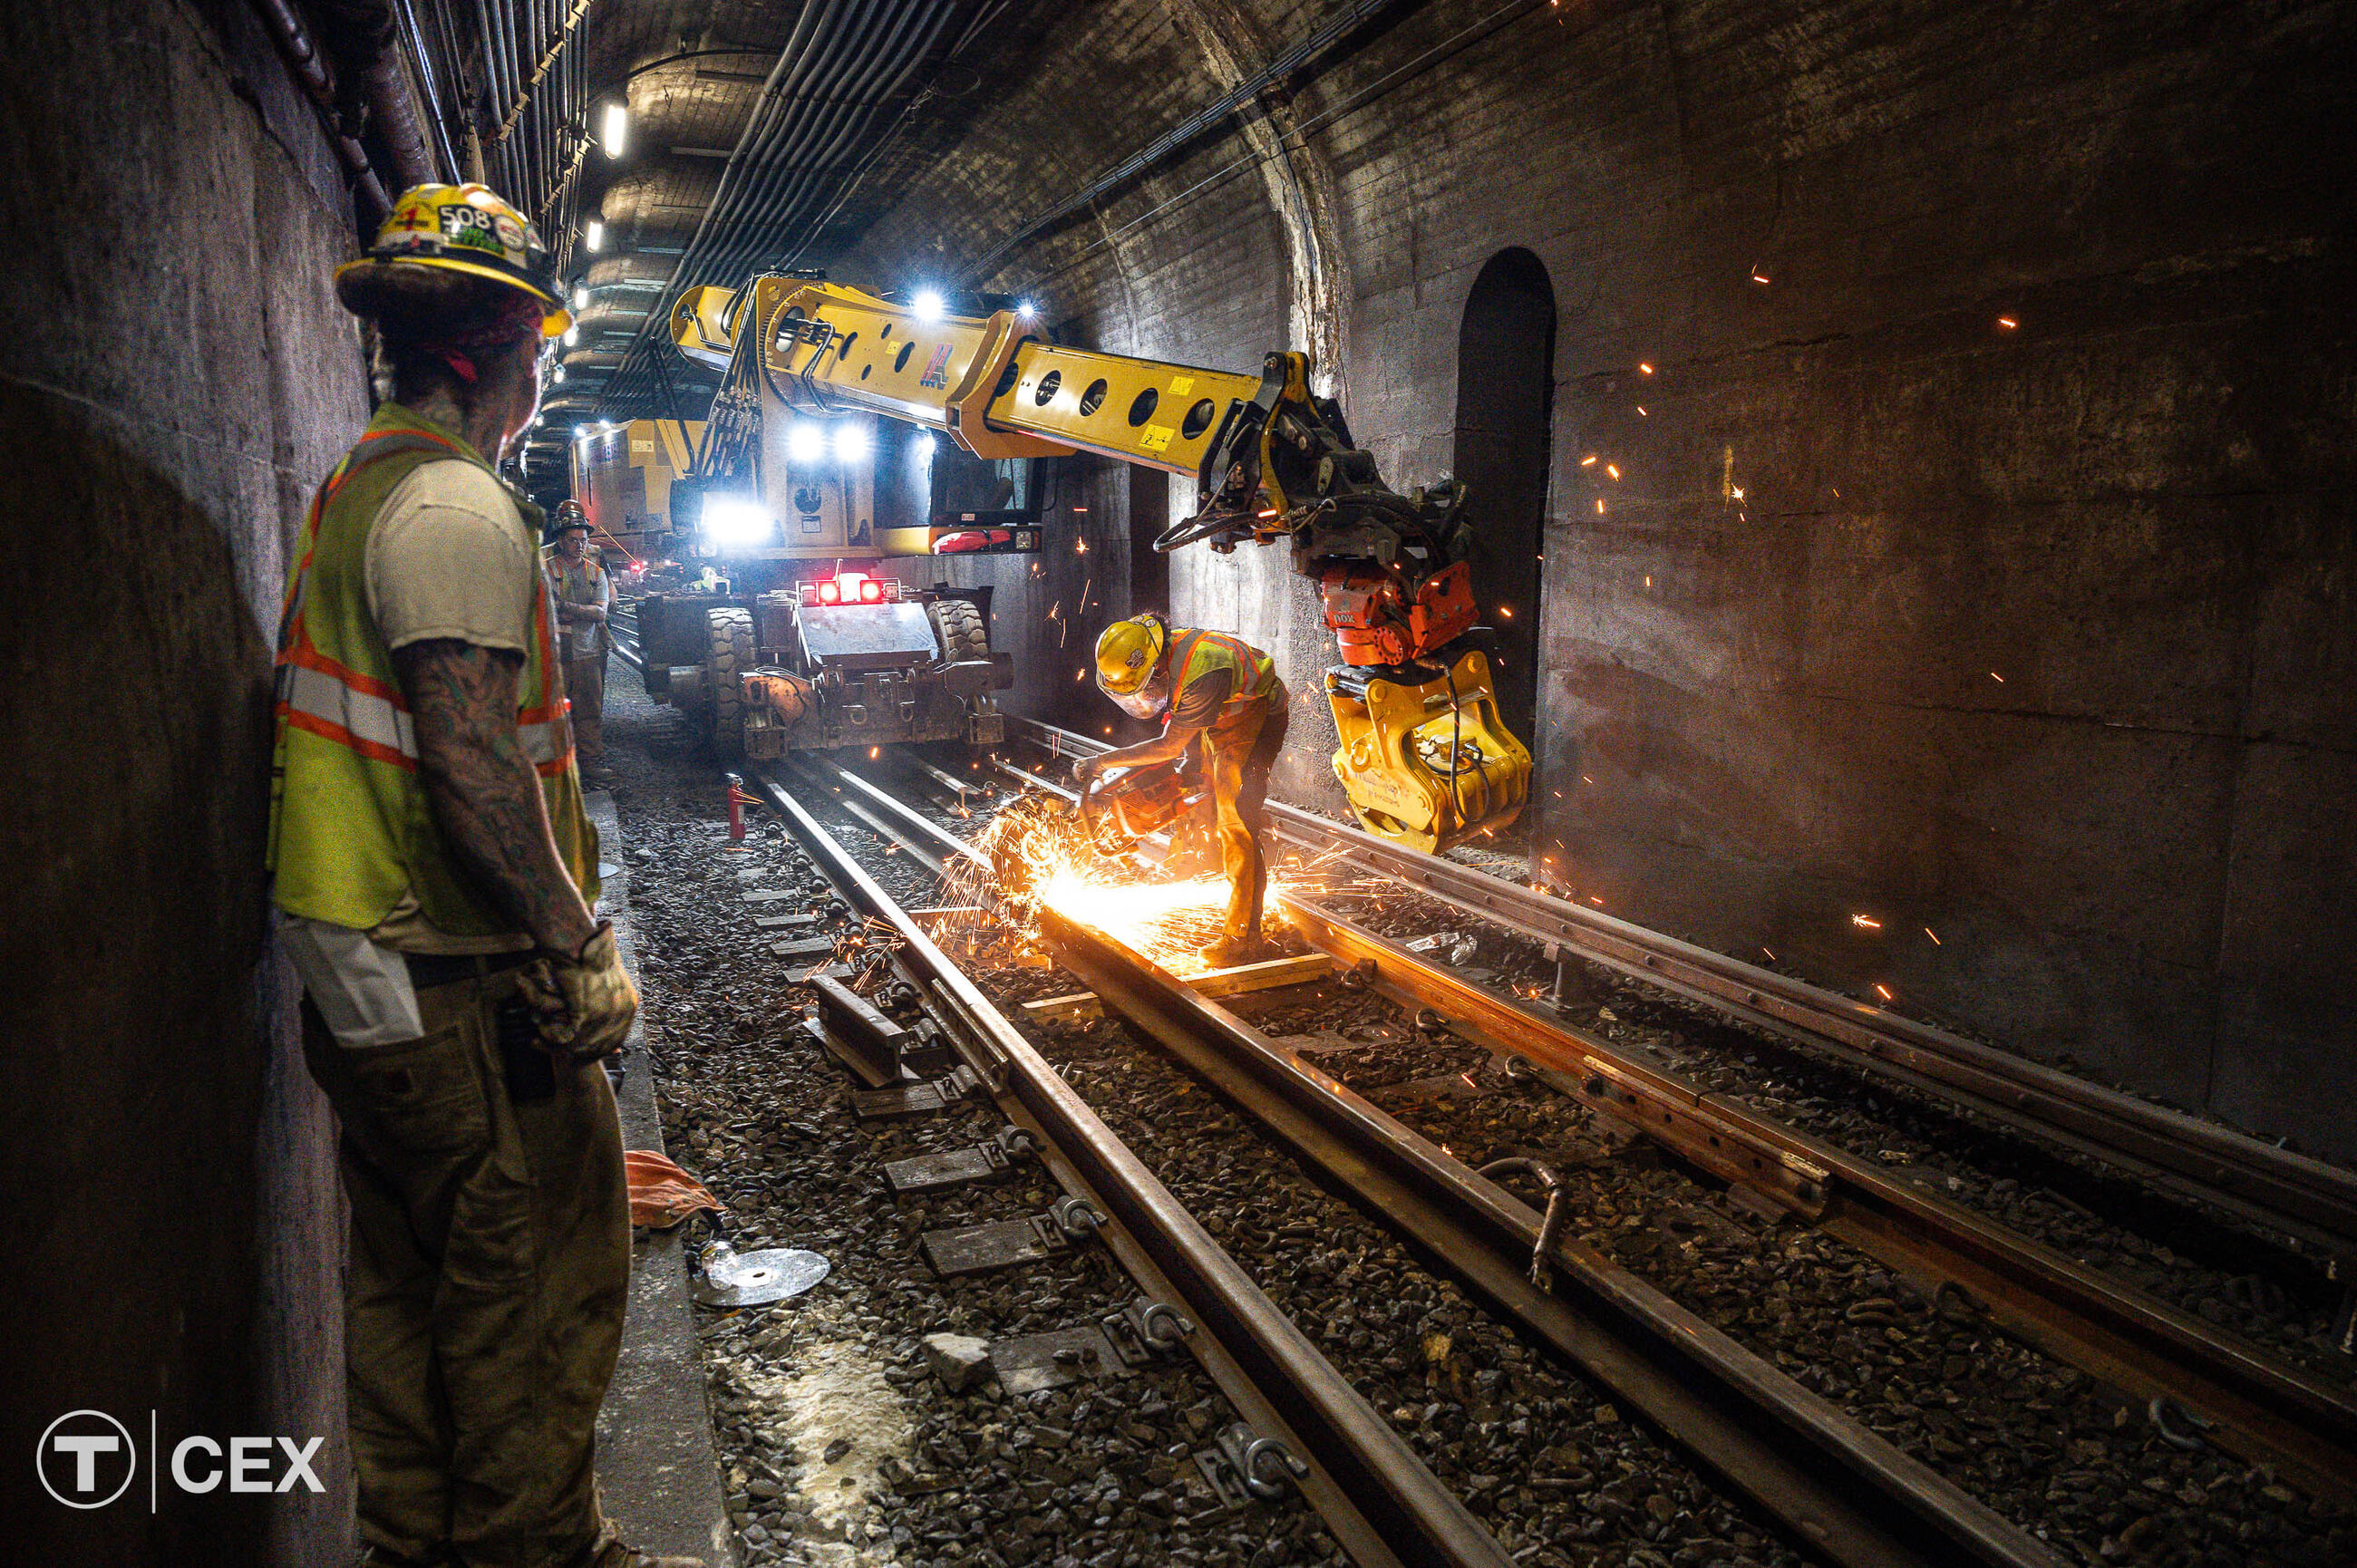 Crews worked in critical track areas during the May Red Line diversion. Complimentary photo by the MBTA Customer and Employee Experience Department.